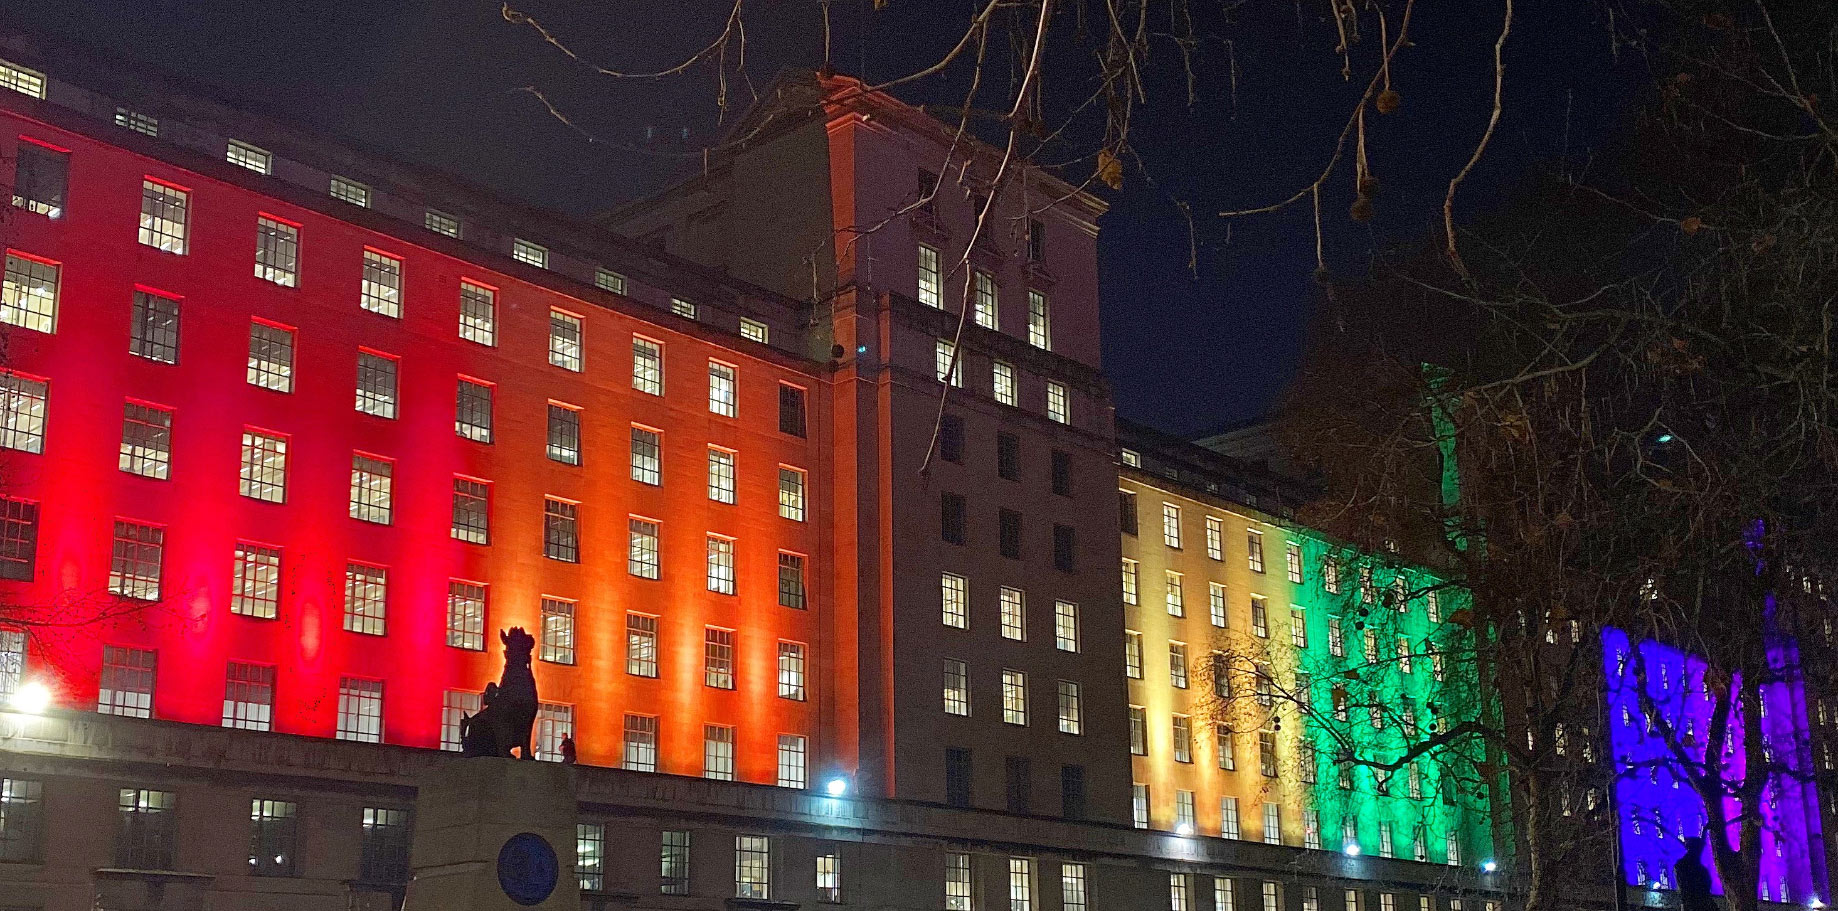 Image of the Ministry of Defence in London, lit up in different colours, at night, to illustrate Vercity's SPV management work.